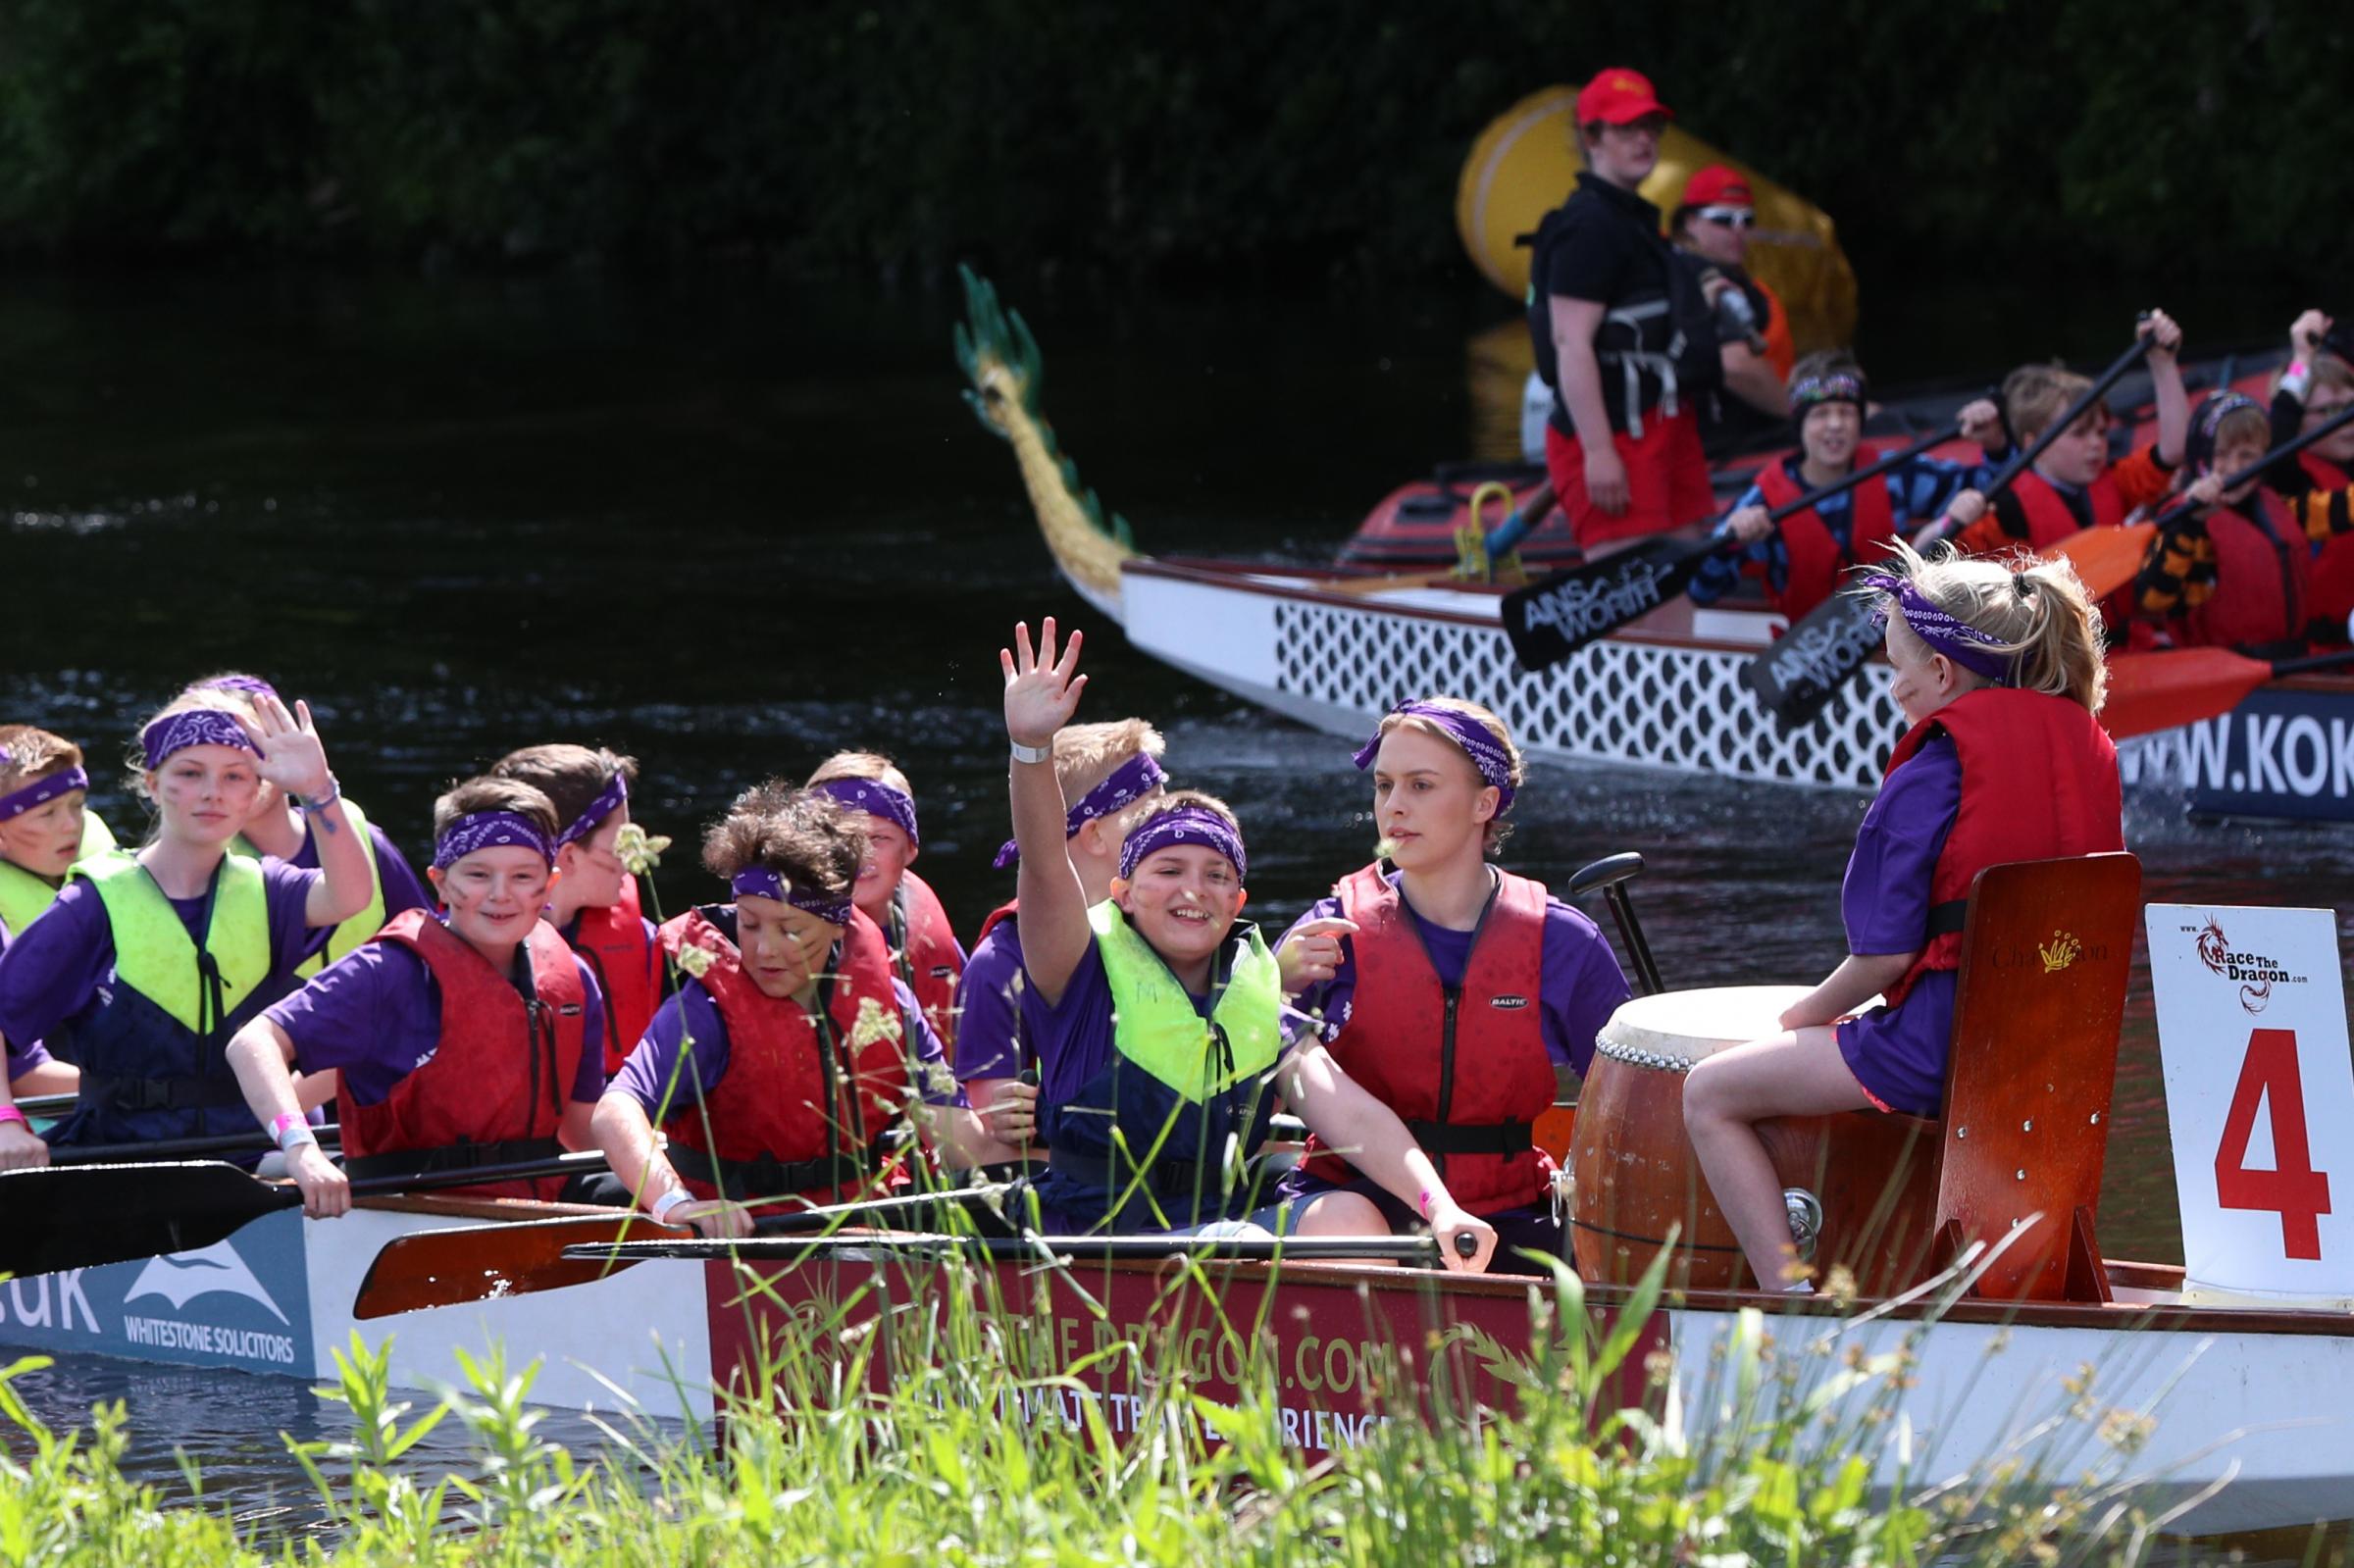 School superstars get Dragonboat Festival off to a great start